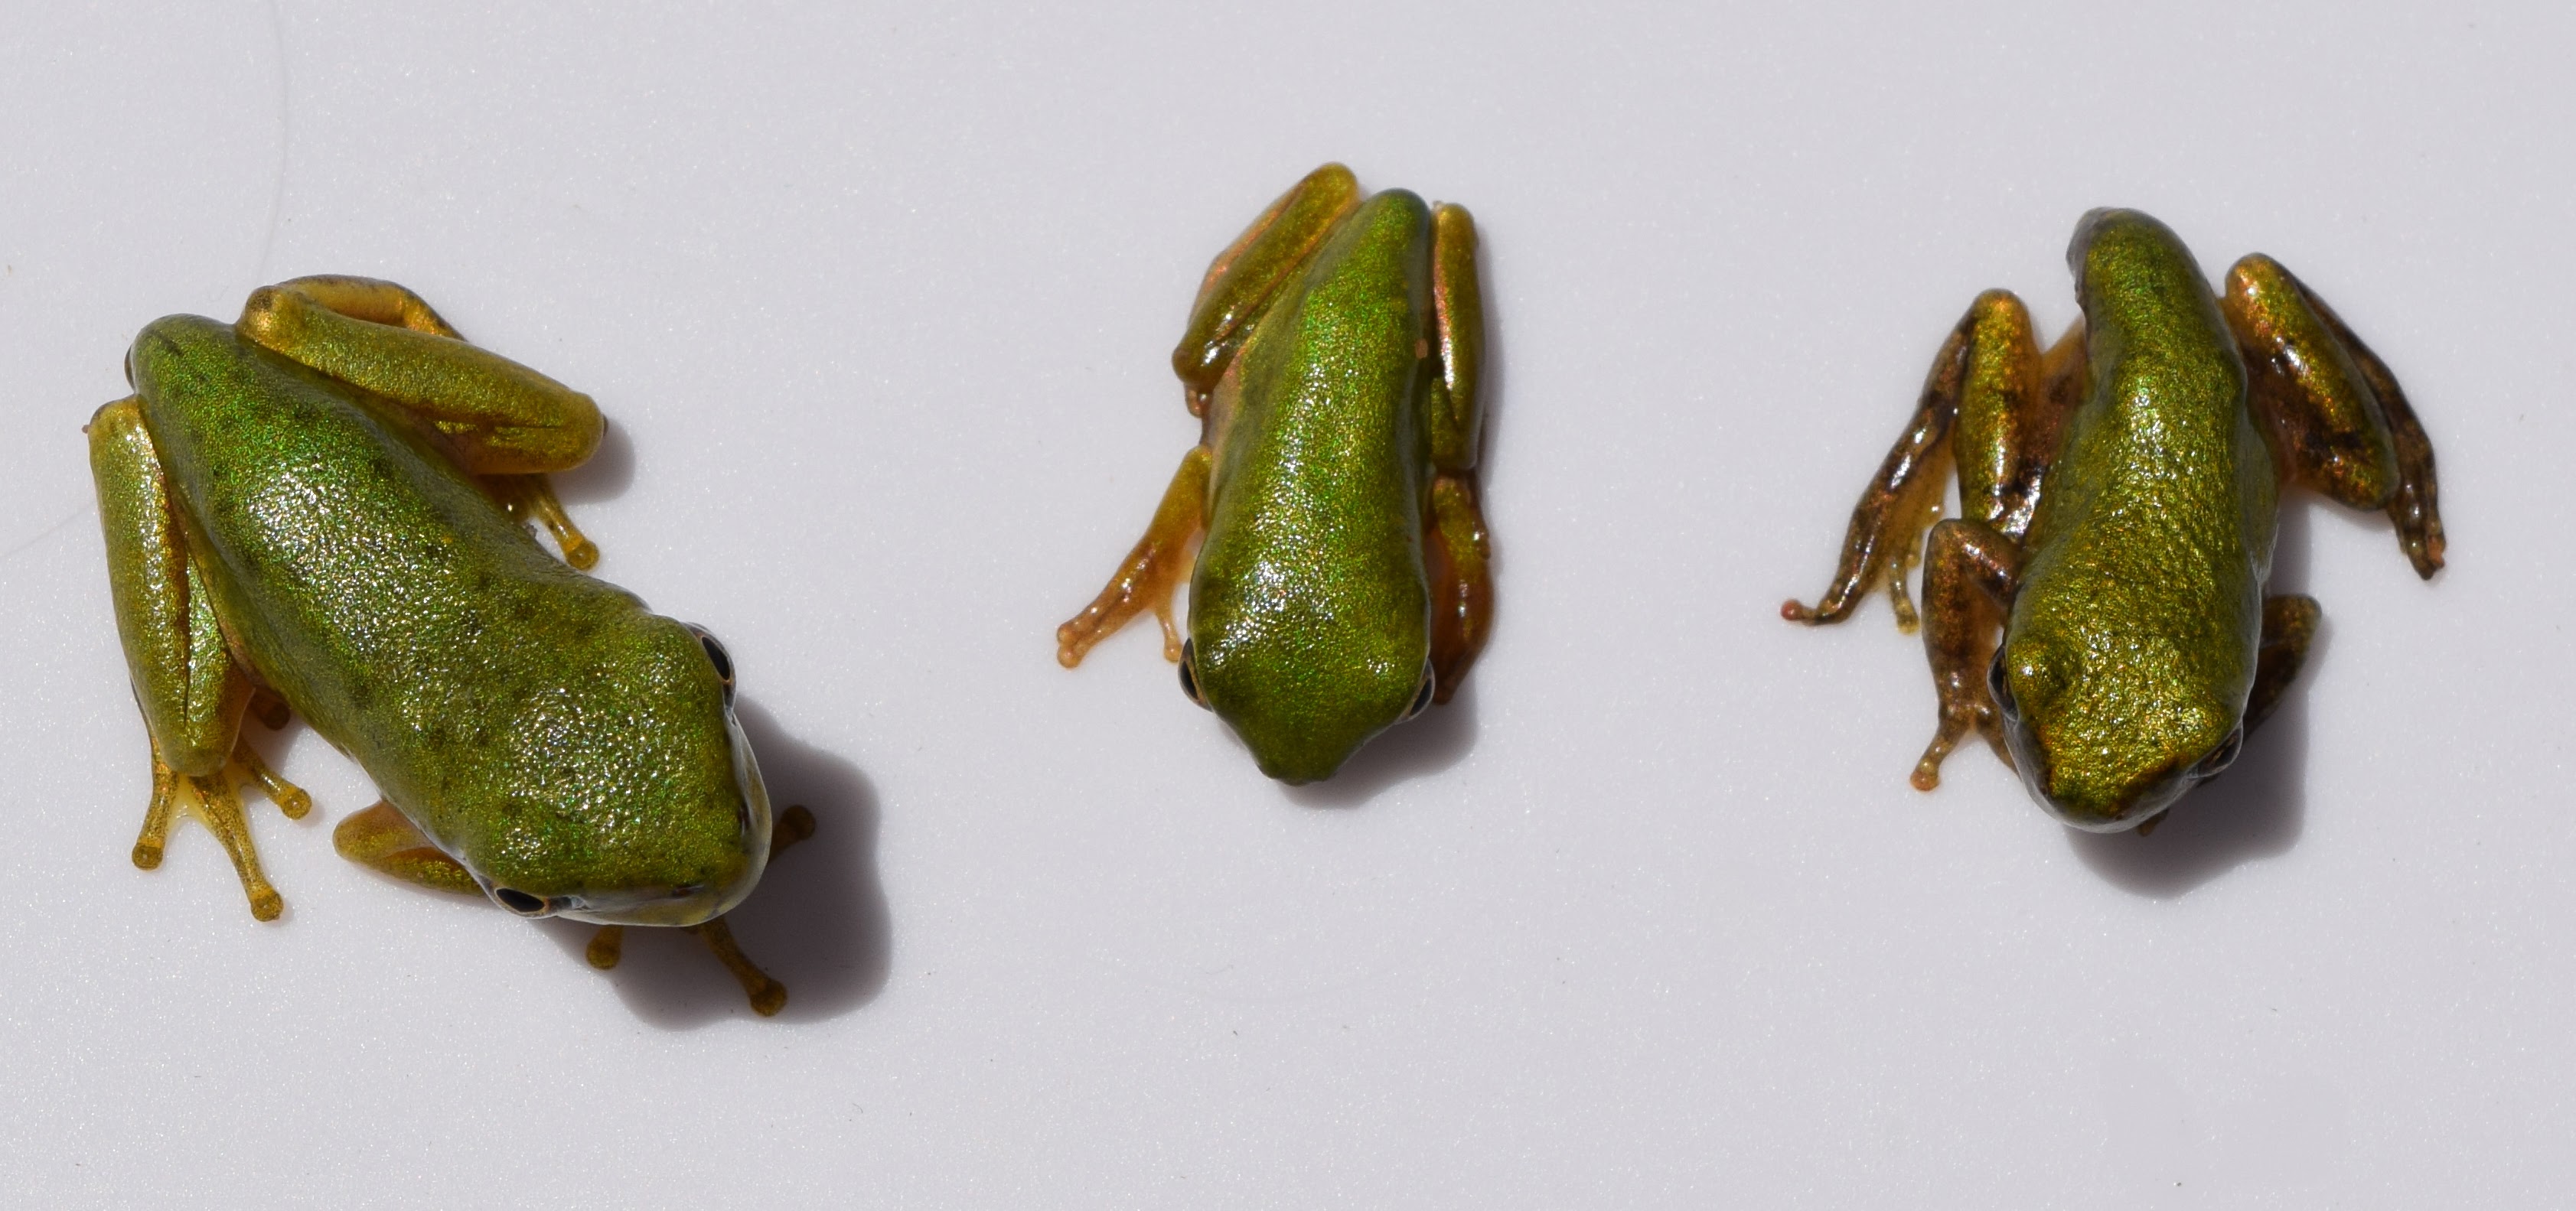 This is a photograph of three recently metamorphosed juvenile frogs. All three appear relatively similar to each other, but each is a different species: the barking treefrog, green treefrog, and gray treefrog.